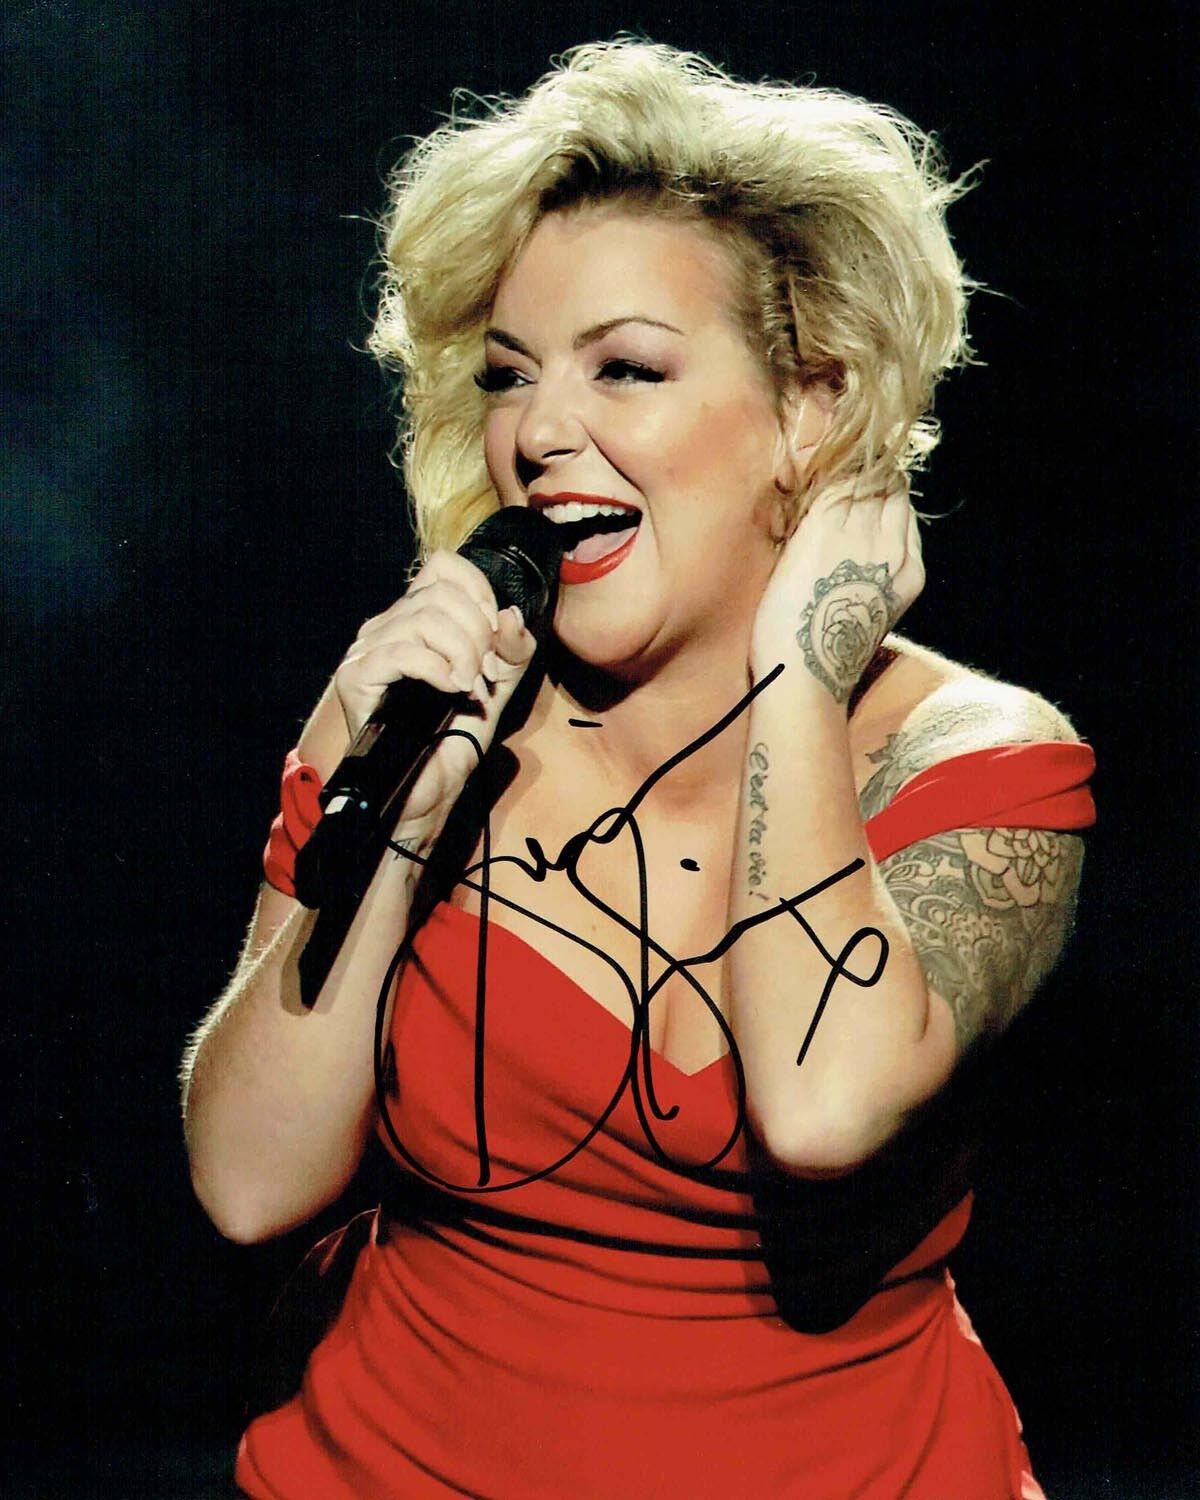 Sheridan SMITH SIGNED Autograph 10x8 Photo Poster painting 6 AFTAL COA Actress Singer Dancer